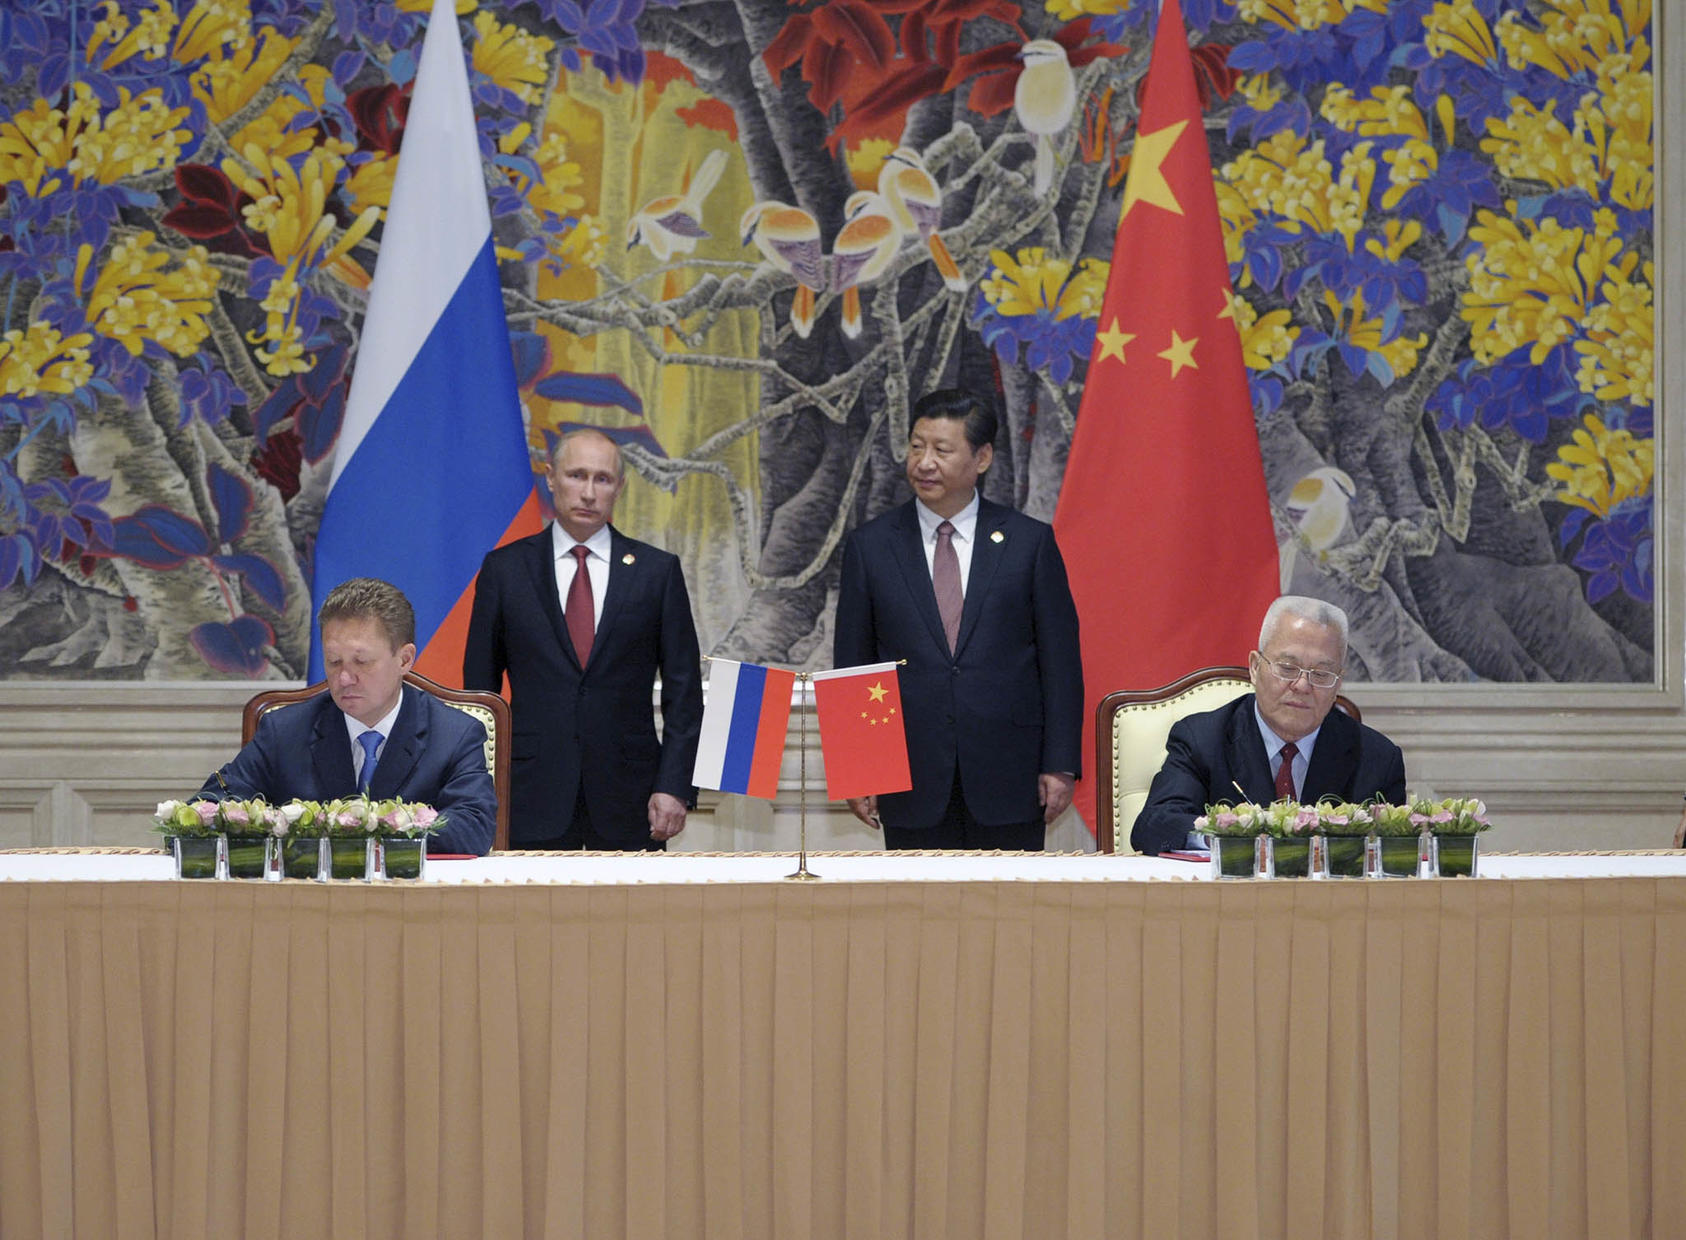 Russian President Vladimir Putin and Chinese Chinese Communist Party General Secretary Xi Jinping stand during the signing of a gas deal in Shanghai, May 21, 2014. (Alexei Druzhinin/RIA Novosti/Pool via The New York Times)